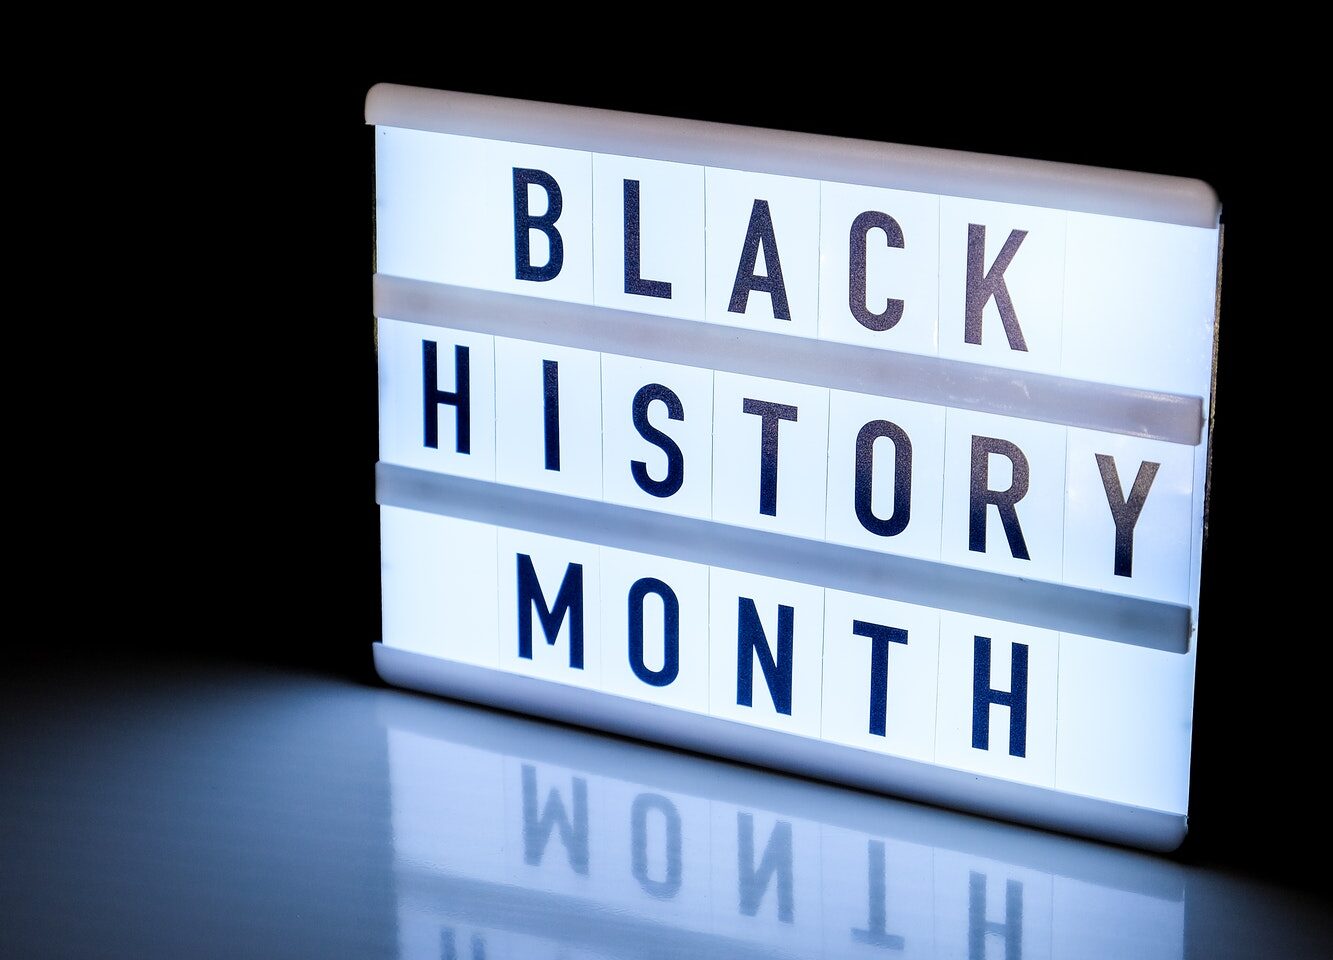 Lightbox with text BLACK HISTORY MONTH on dark black background with mirror reflection. Message